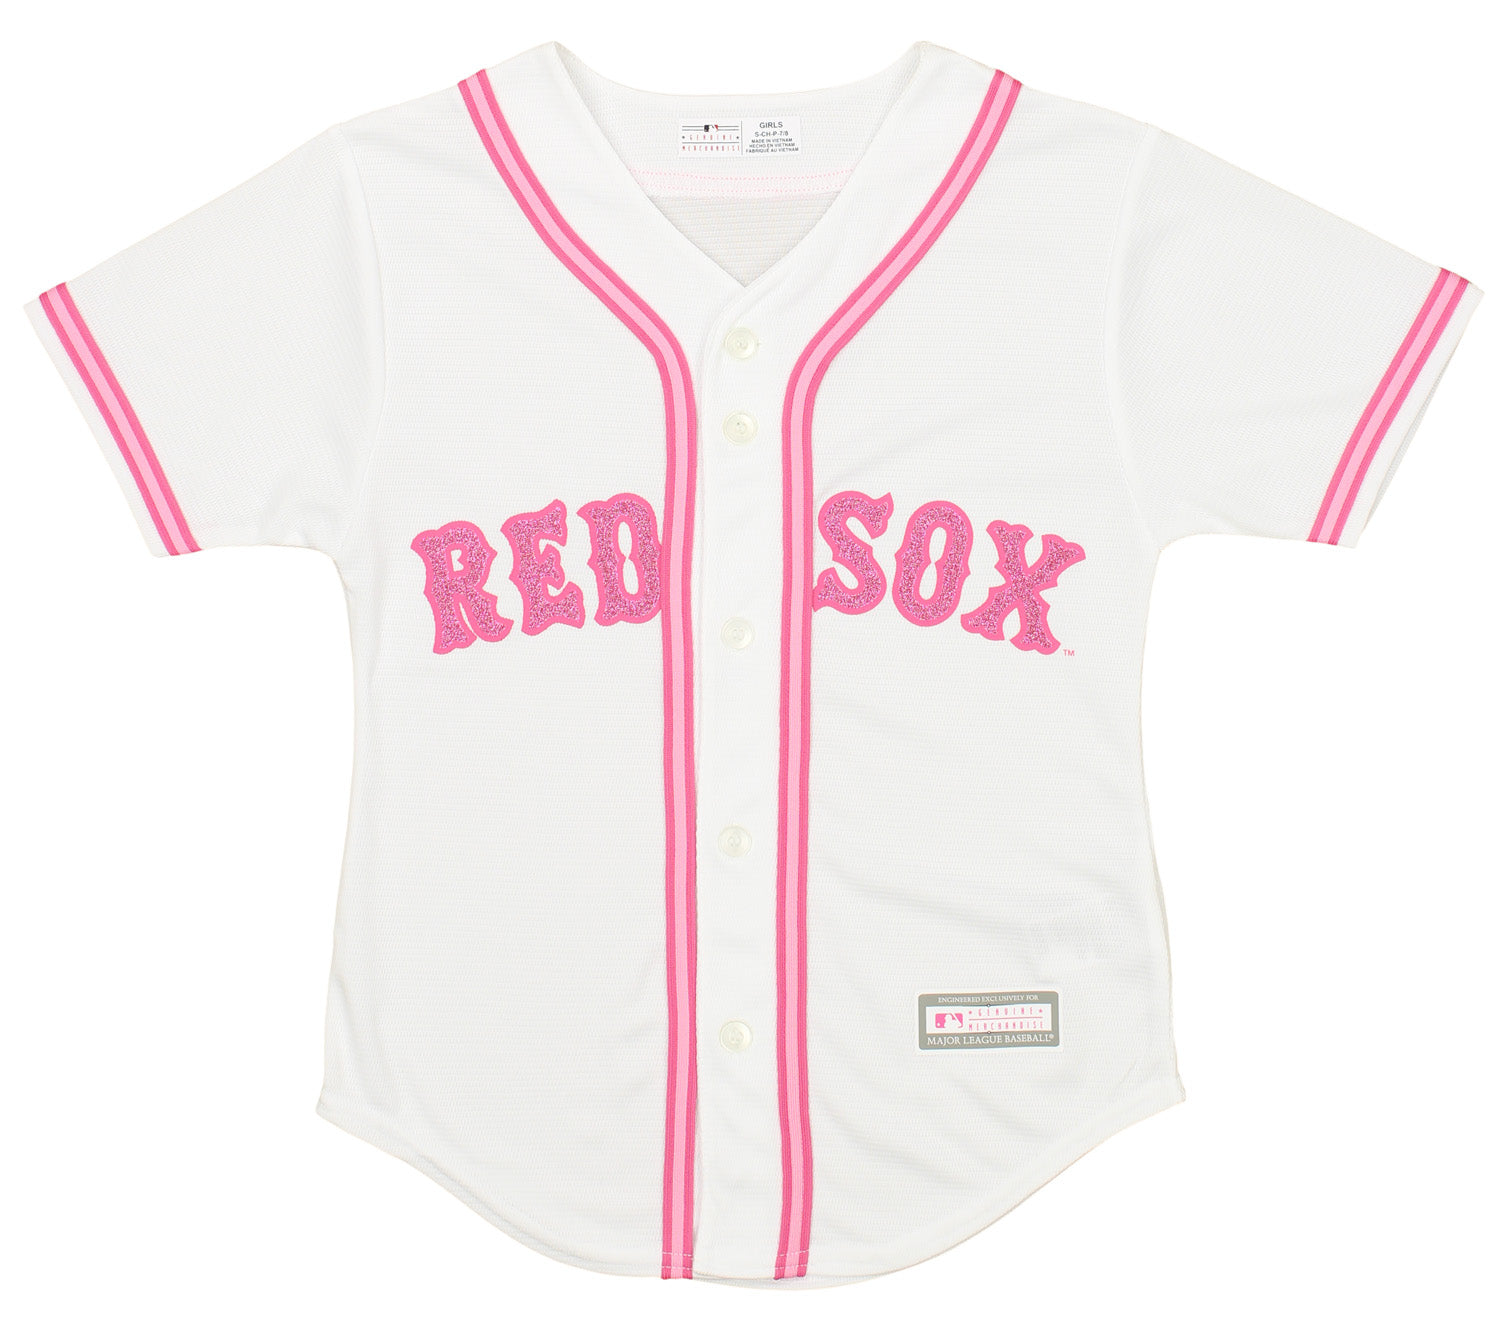 pink white sox jersey